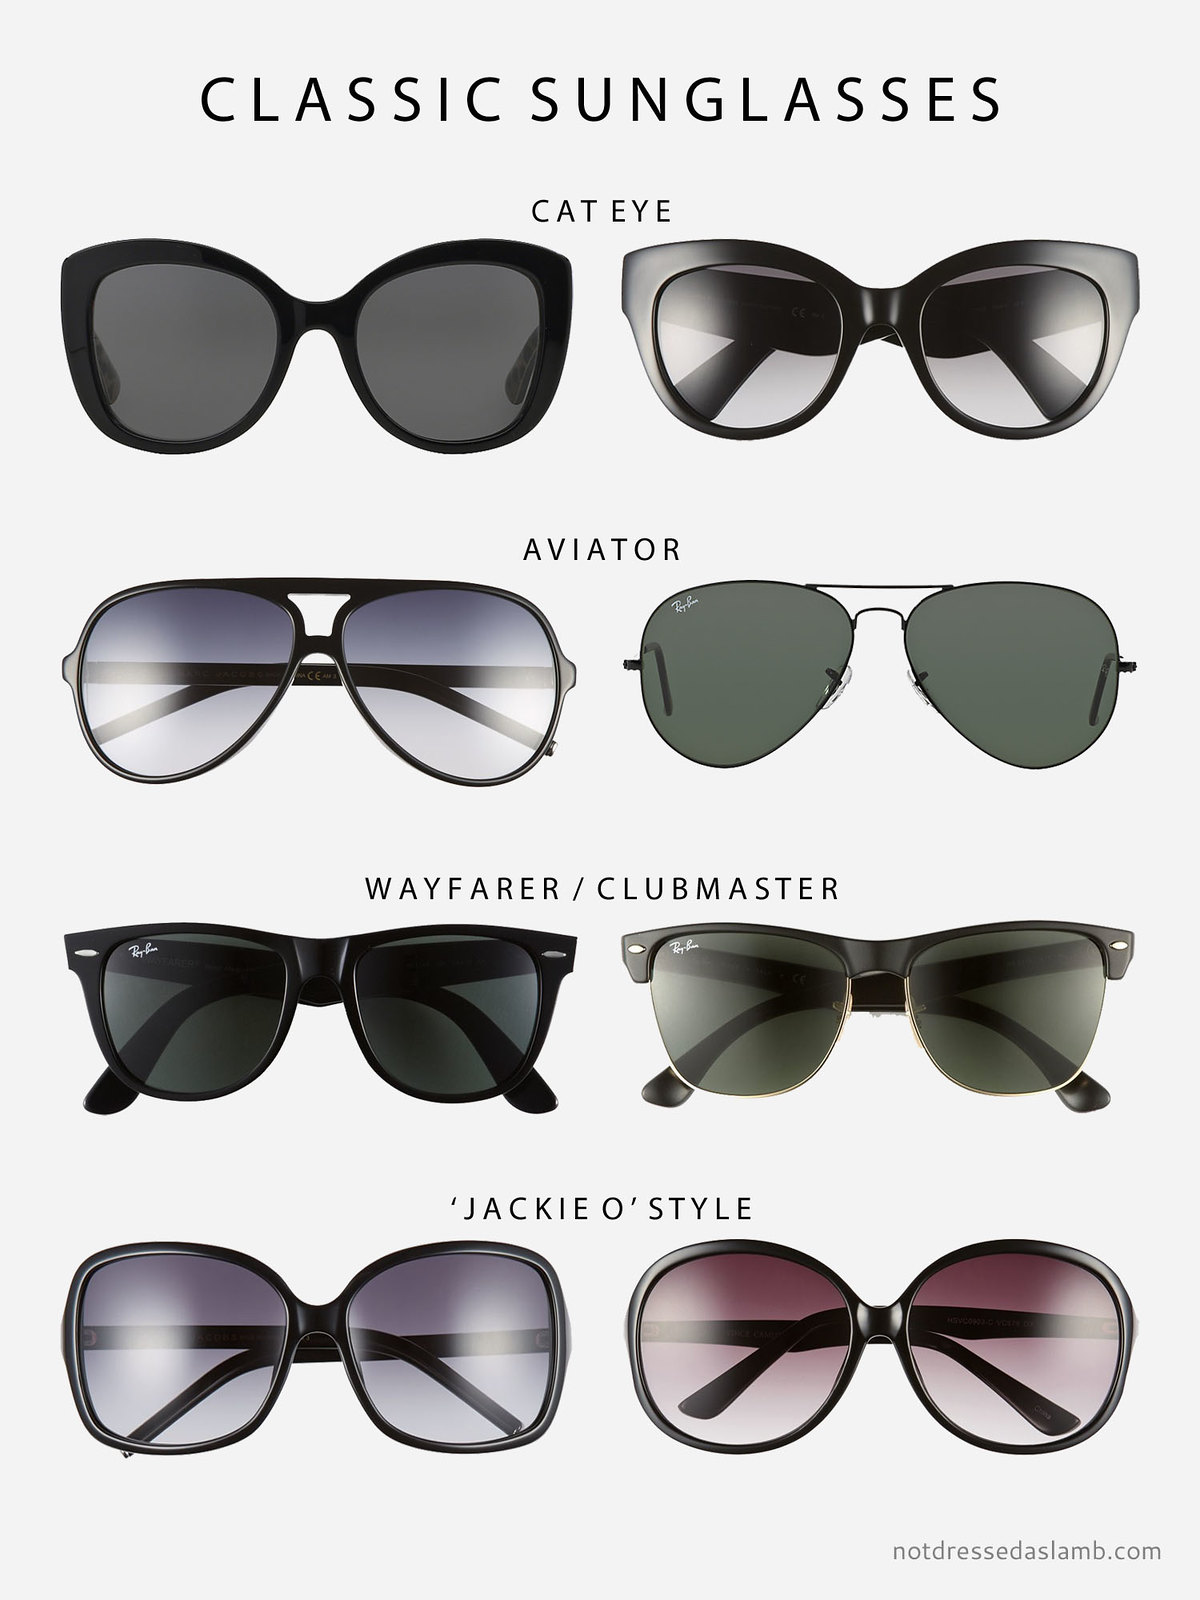 Capsule Wardrobe Pieces That Suit All Body Shapes & Sizes - No.1 Classic sunglasses: Cat eye, Aviator, Wayfarer, Clubmaster, oversized Jackie O style | Not Dressed As Lamb